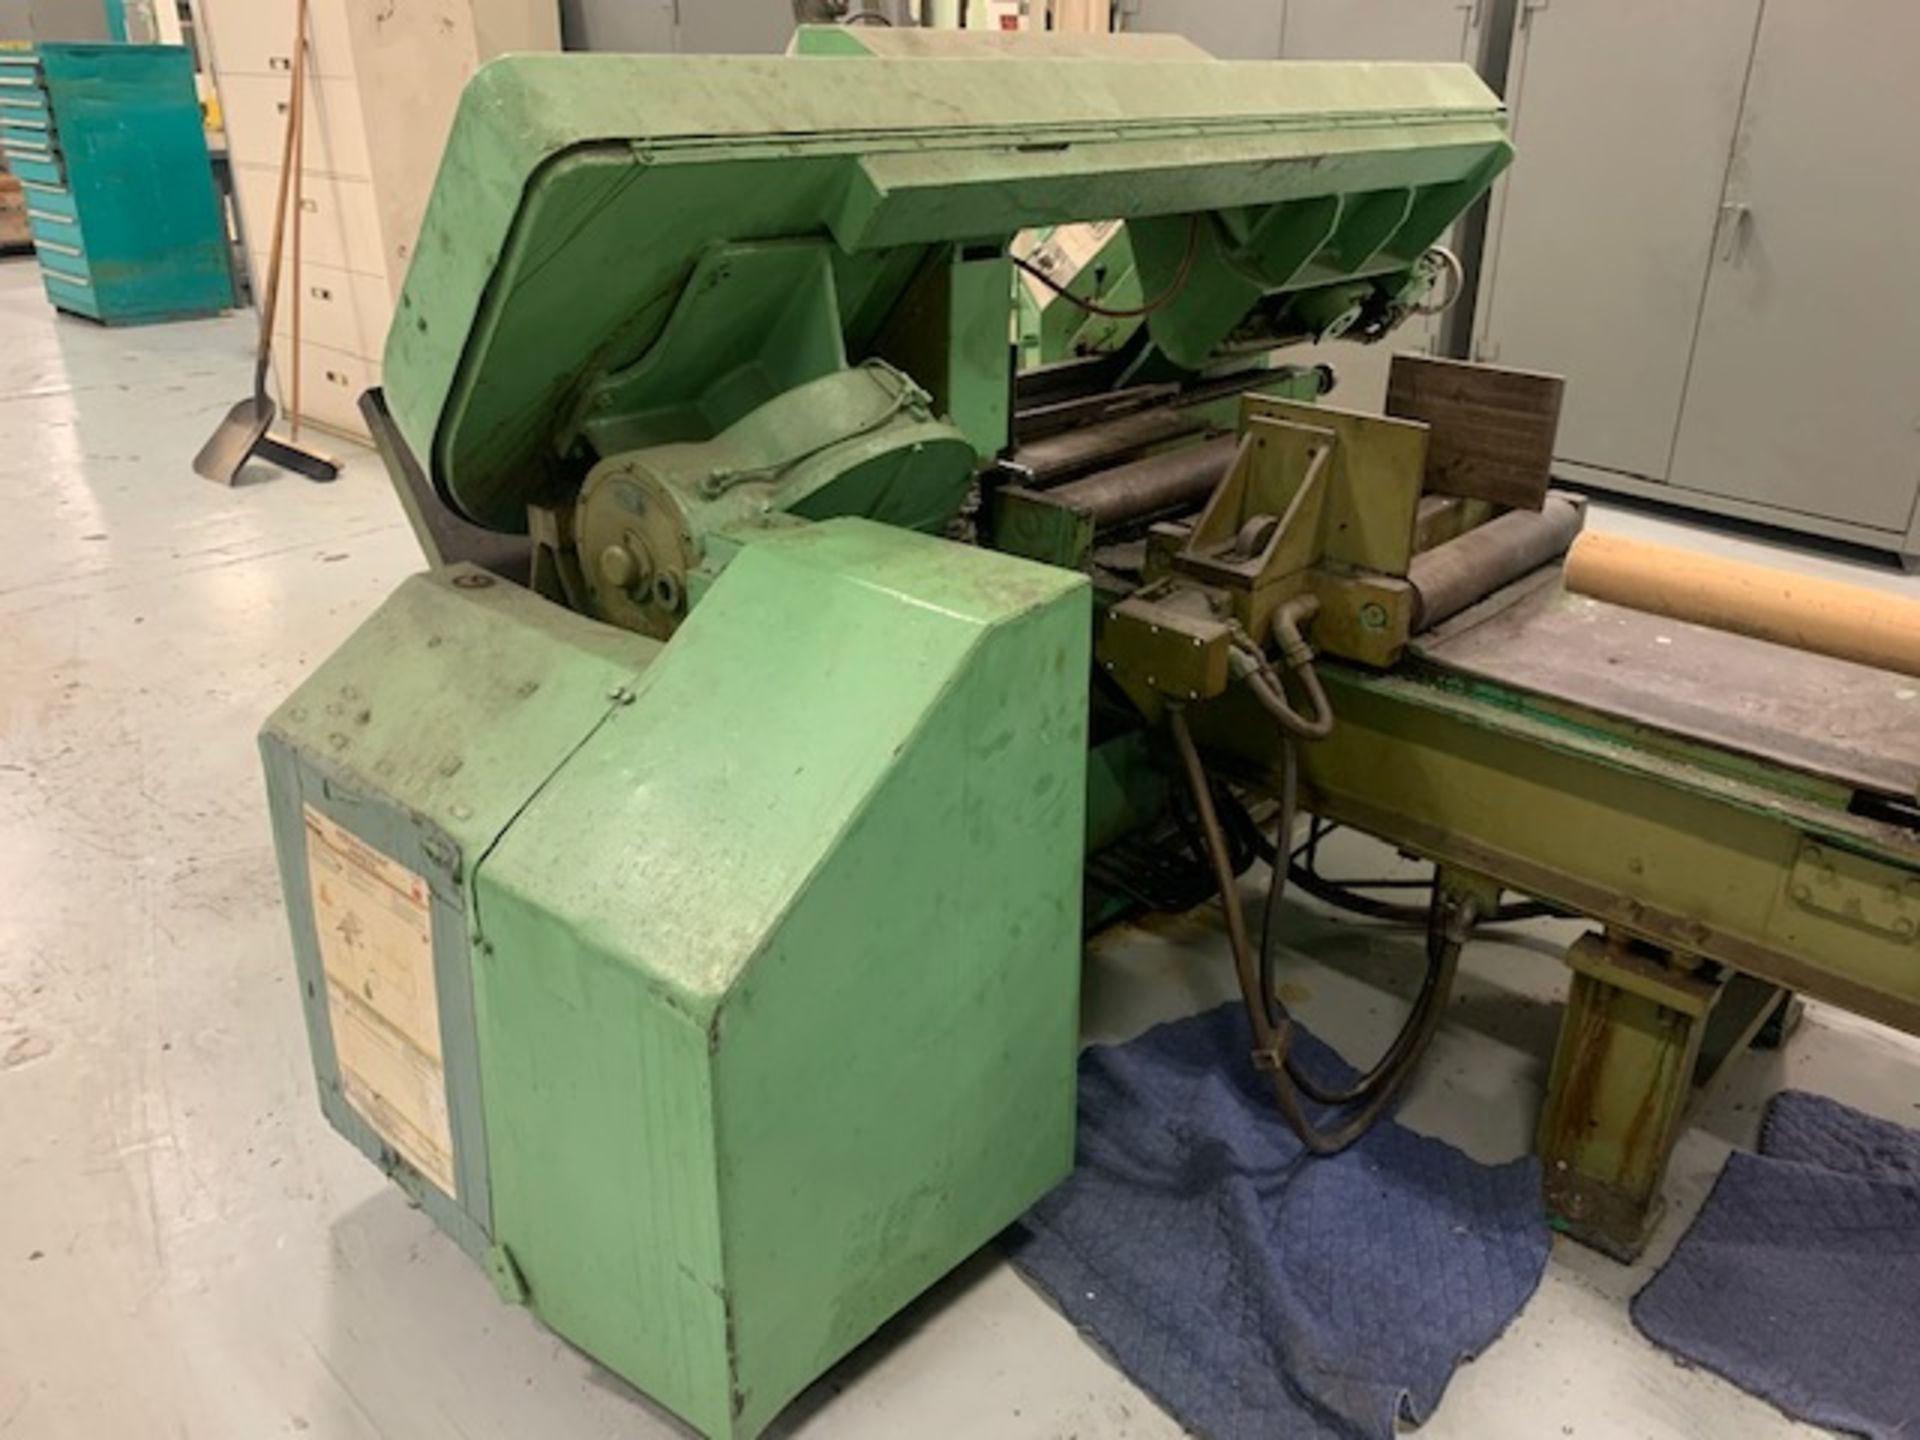 15in x 20in Marvel #15A Horizontal Bandsaw w/ Infeed Table - Image 9 of 9